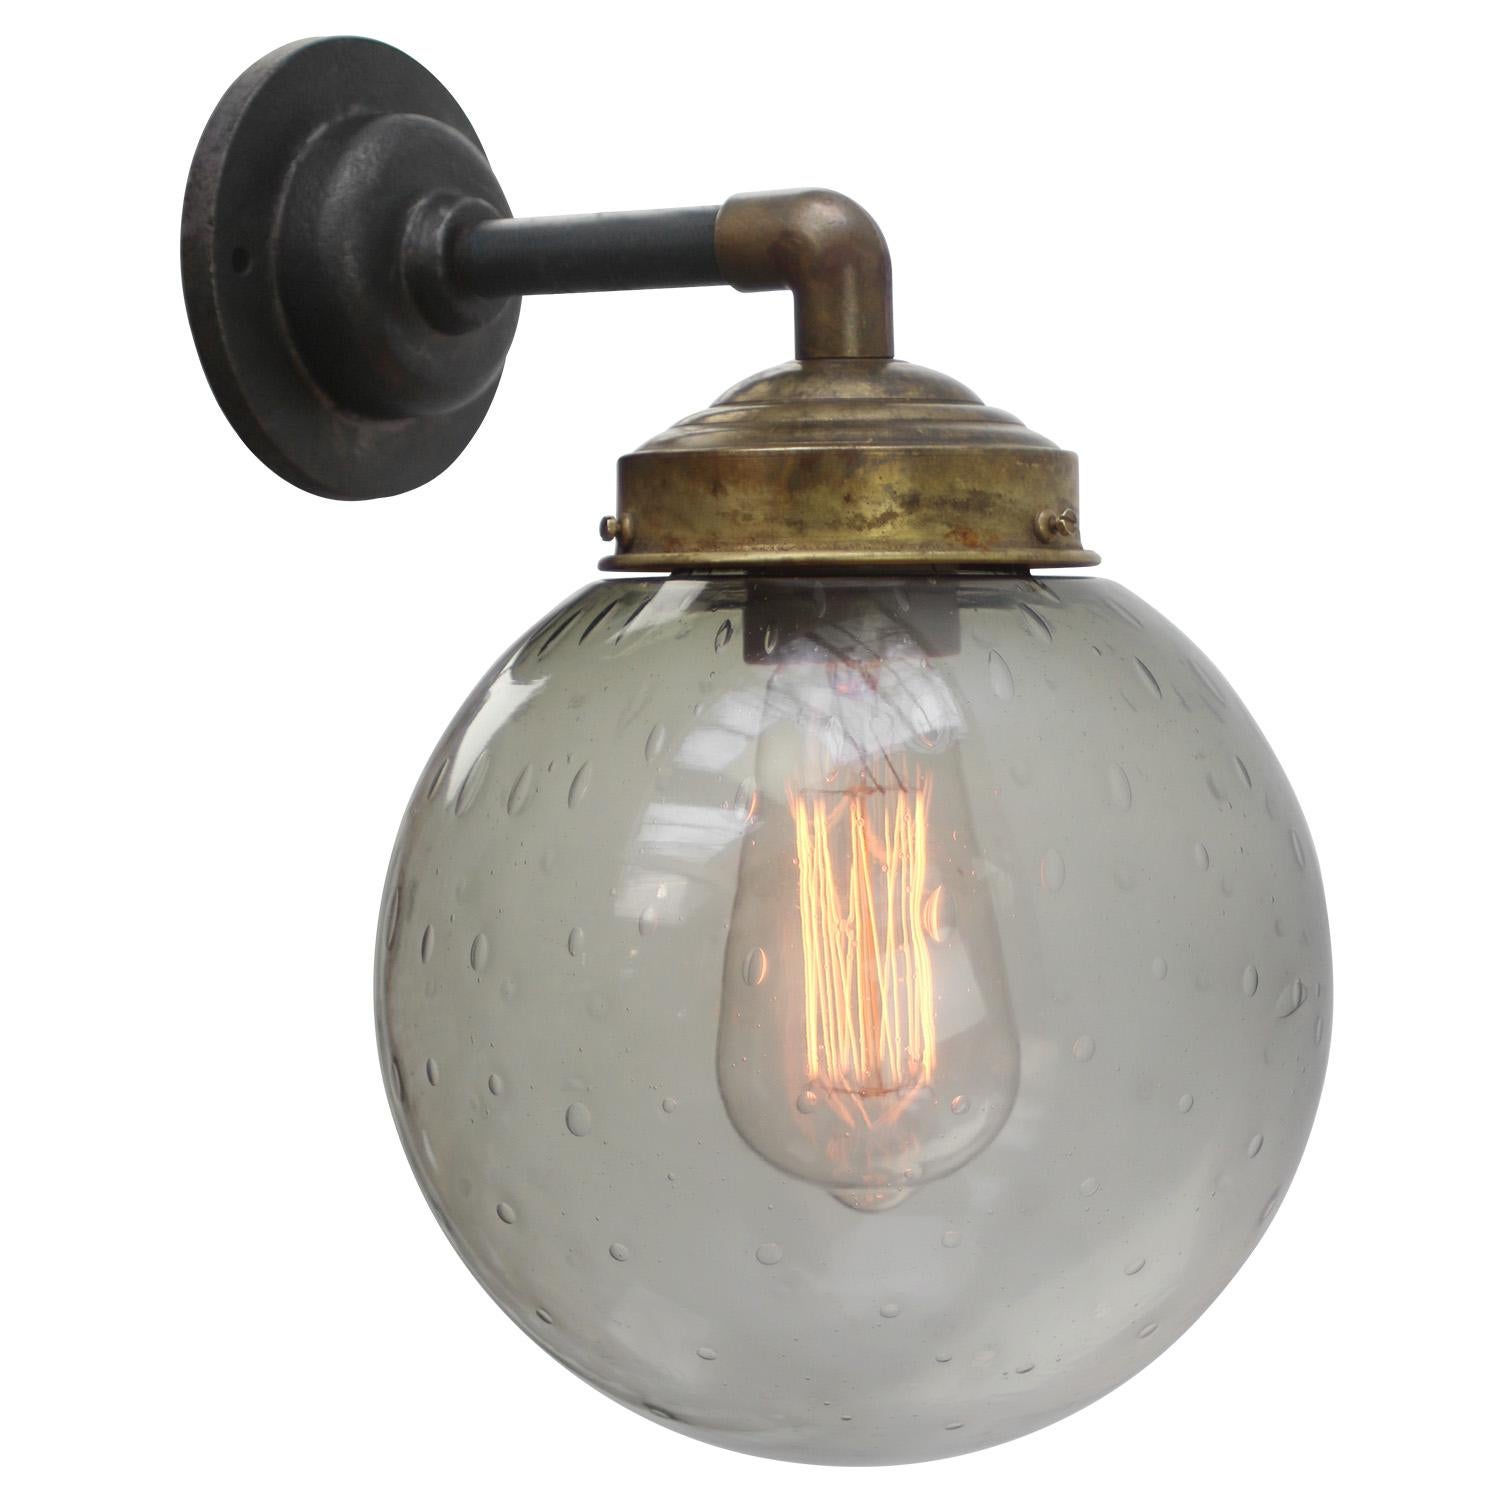 Brass and cast Iron Industrial wall light
smoked air bubble glass globe

Diameter cast iron wall piece: 10.5 cm / 4”, 2 holes to secure

Weight: 2.50 kg / 5.5 lb

Priced per individual item. All lamps have been made suitable by international